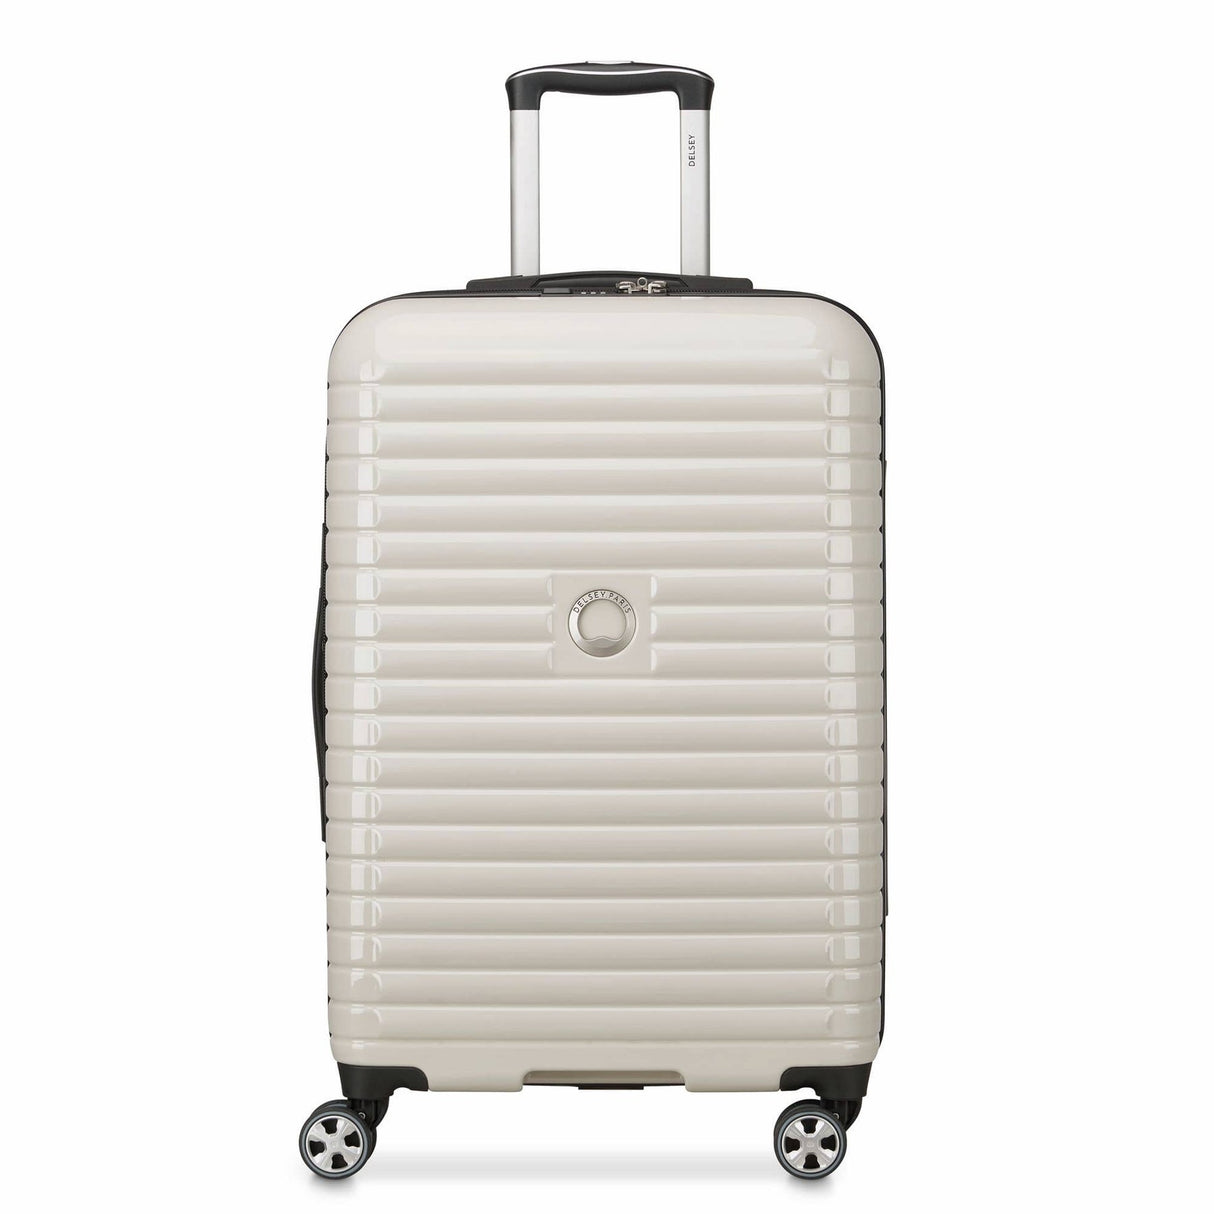 Delsey Cruise 3.0 Medium Checked Expandable Spinner , Ivory , 15-delsey-cruise-30-40287982027-01_1800x1800_17d59a03-e2c4-4673-9cda-757482116256